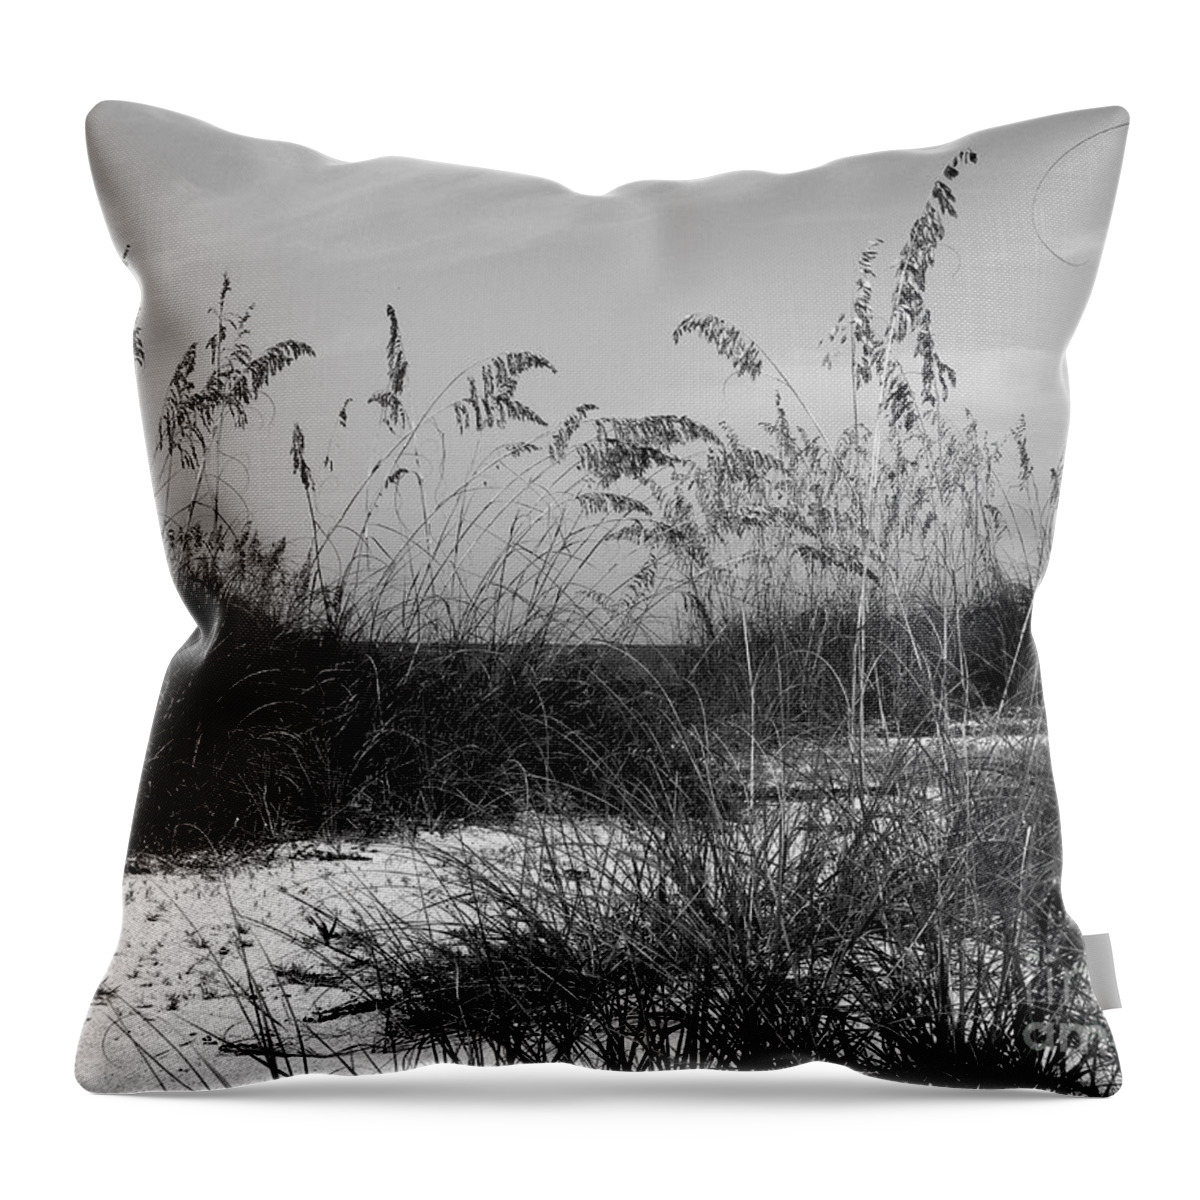 Sand Throw Pillow featuring the photograph Seclusion by Terri Mills